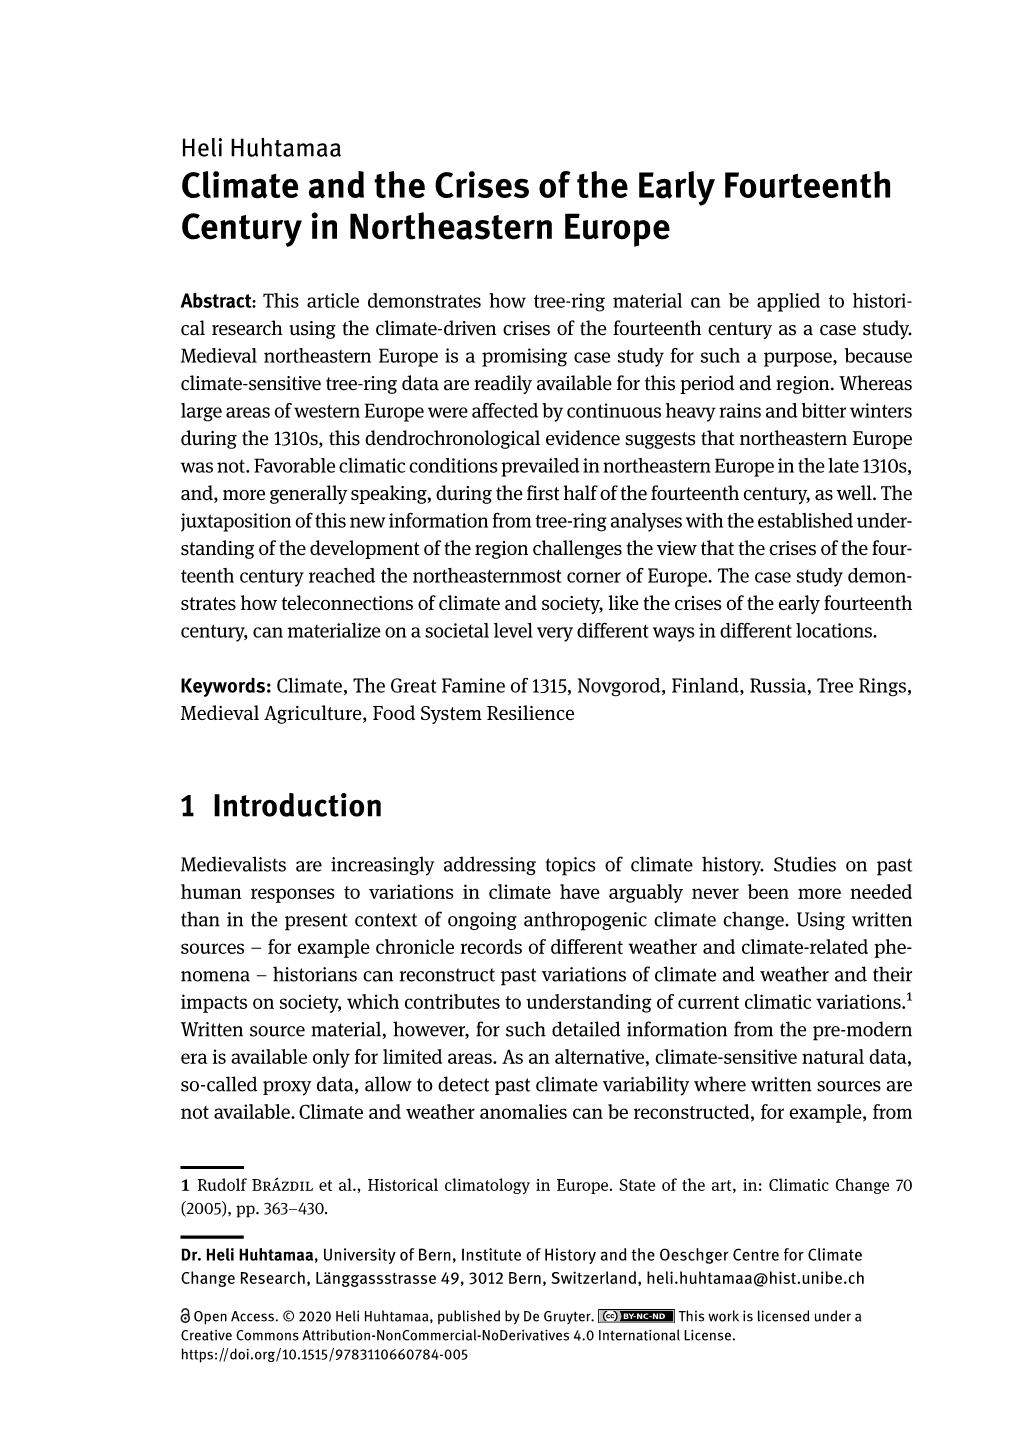 Climate and the Crises of the Early Fourteenth Century in Northeastern Europe